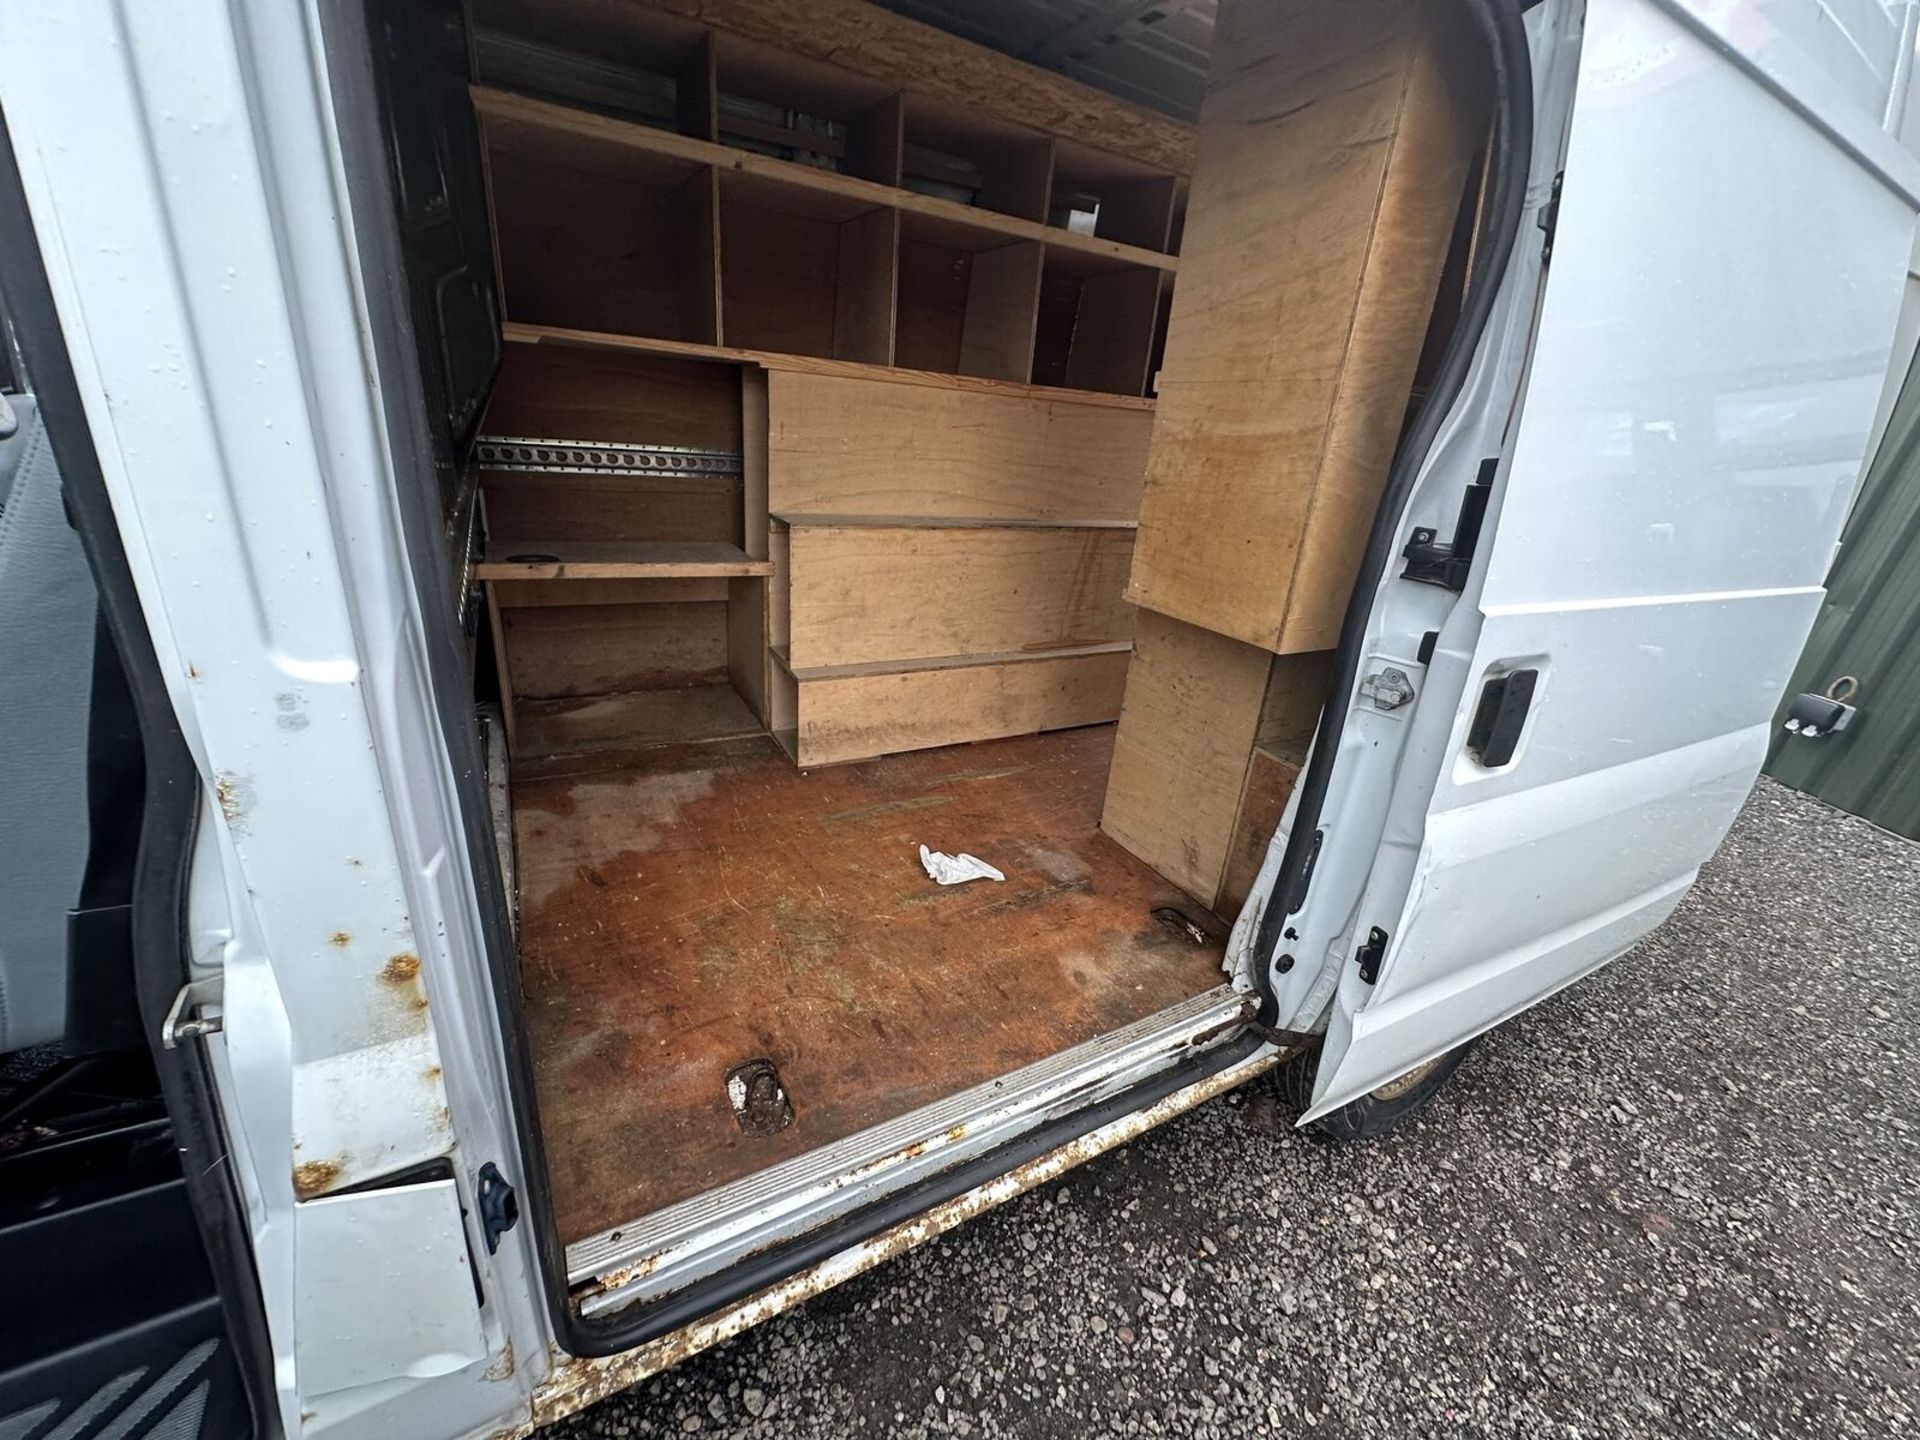 RELIABLE WORKHORSE: 60 PLATE FORD TRANSIT 260, MEDIUM ROOF, READY TO TACKLE TASKS - Image 9 of 9